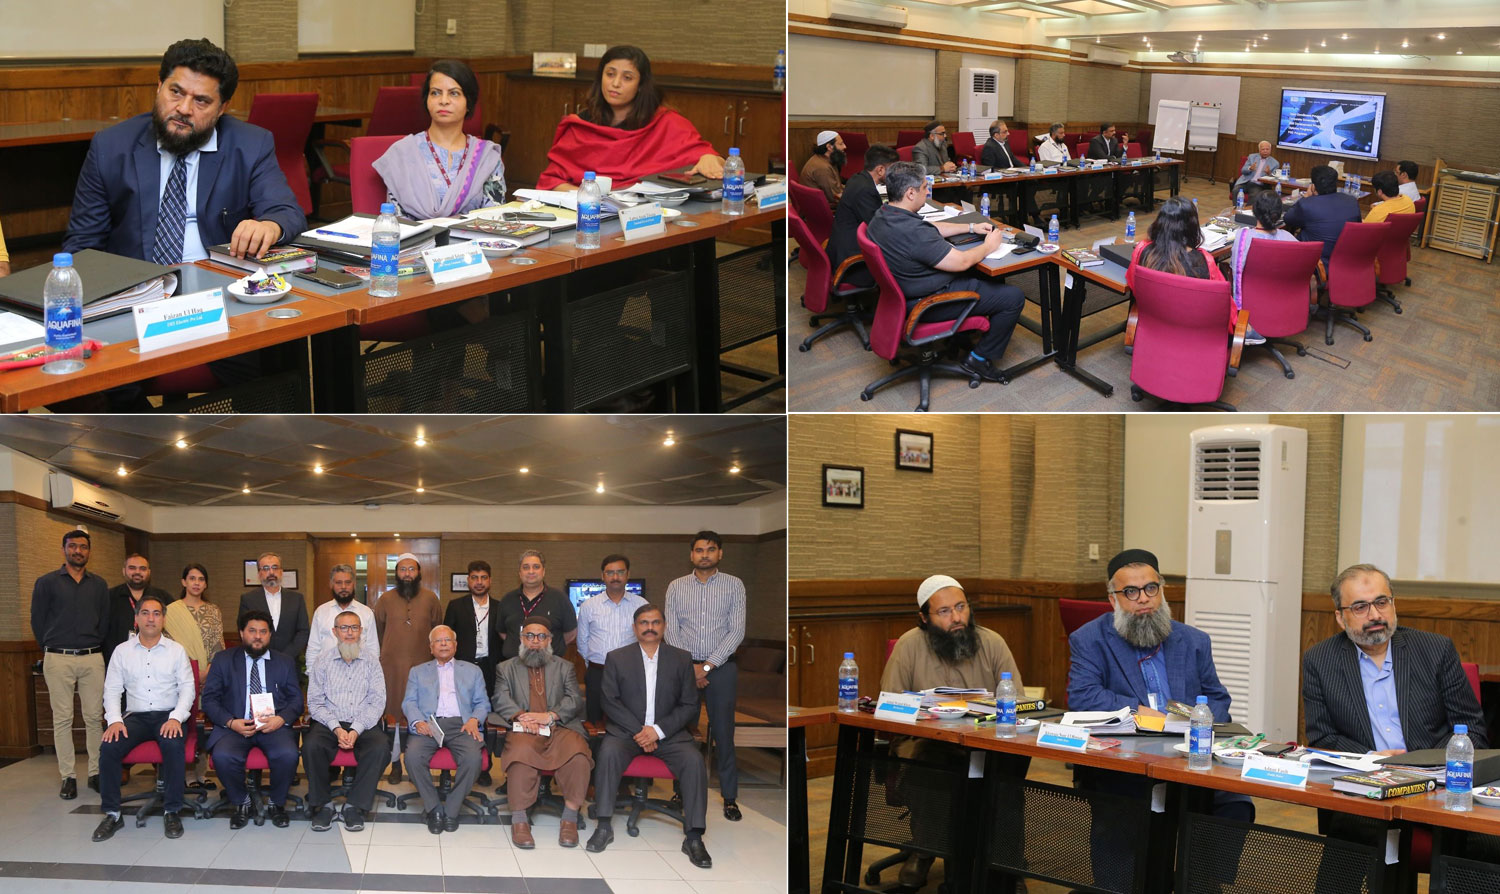 CEE at IBA Karachi hosted the Directors' Training Program (DTP) for Islamic Financial Institutions